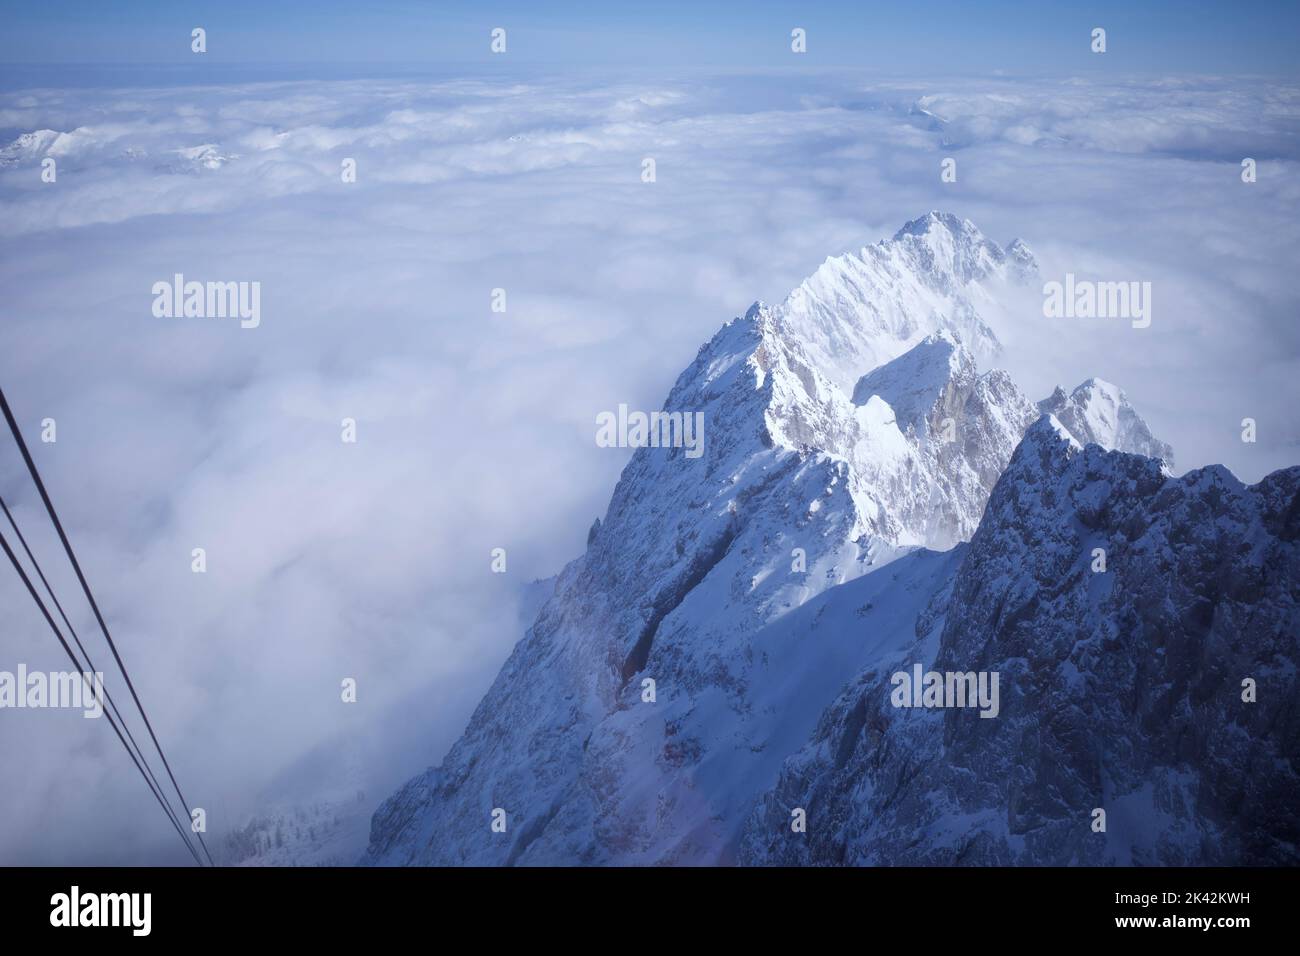 Zugspitze, the highest alps in southern Germany. The photo was taken from inside a cable car to the peak. Stock Photo